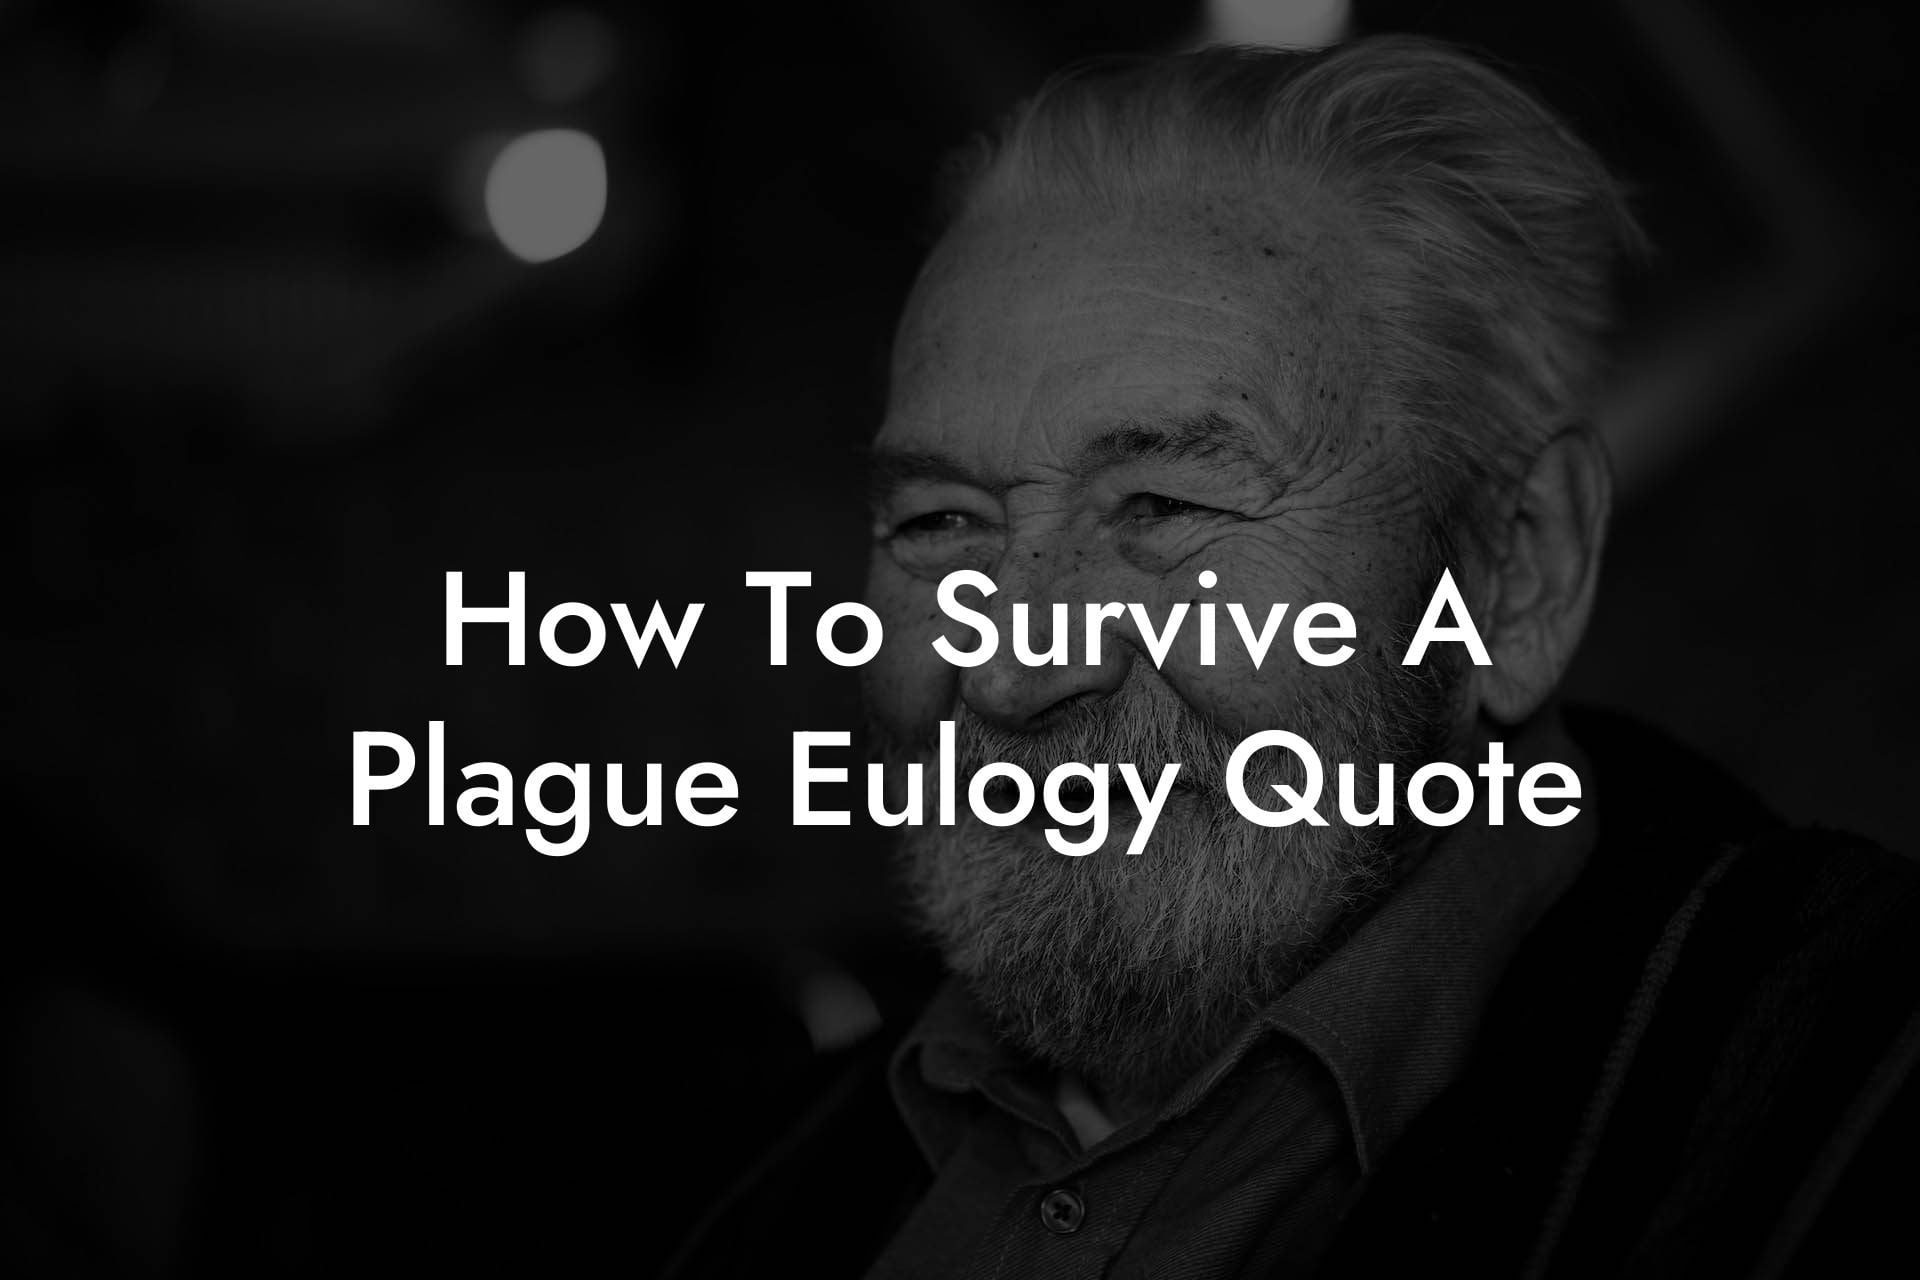 How To Survive A Plague Eulogy Quote